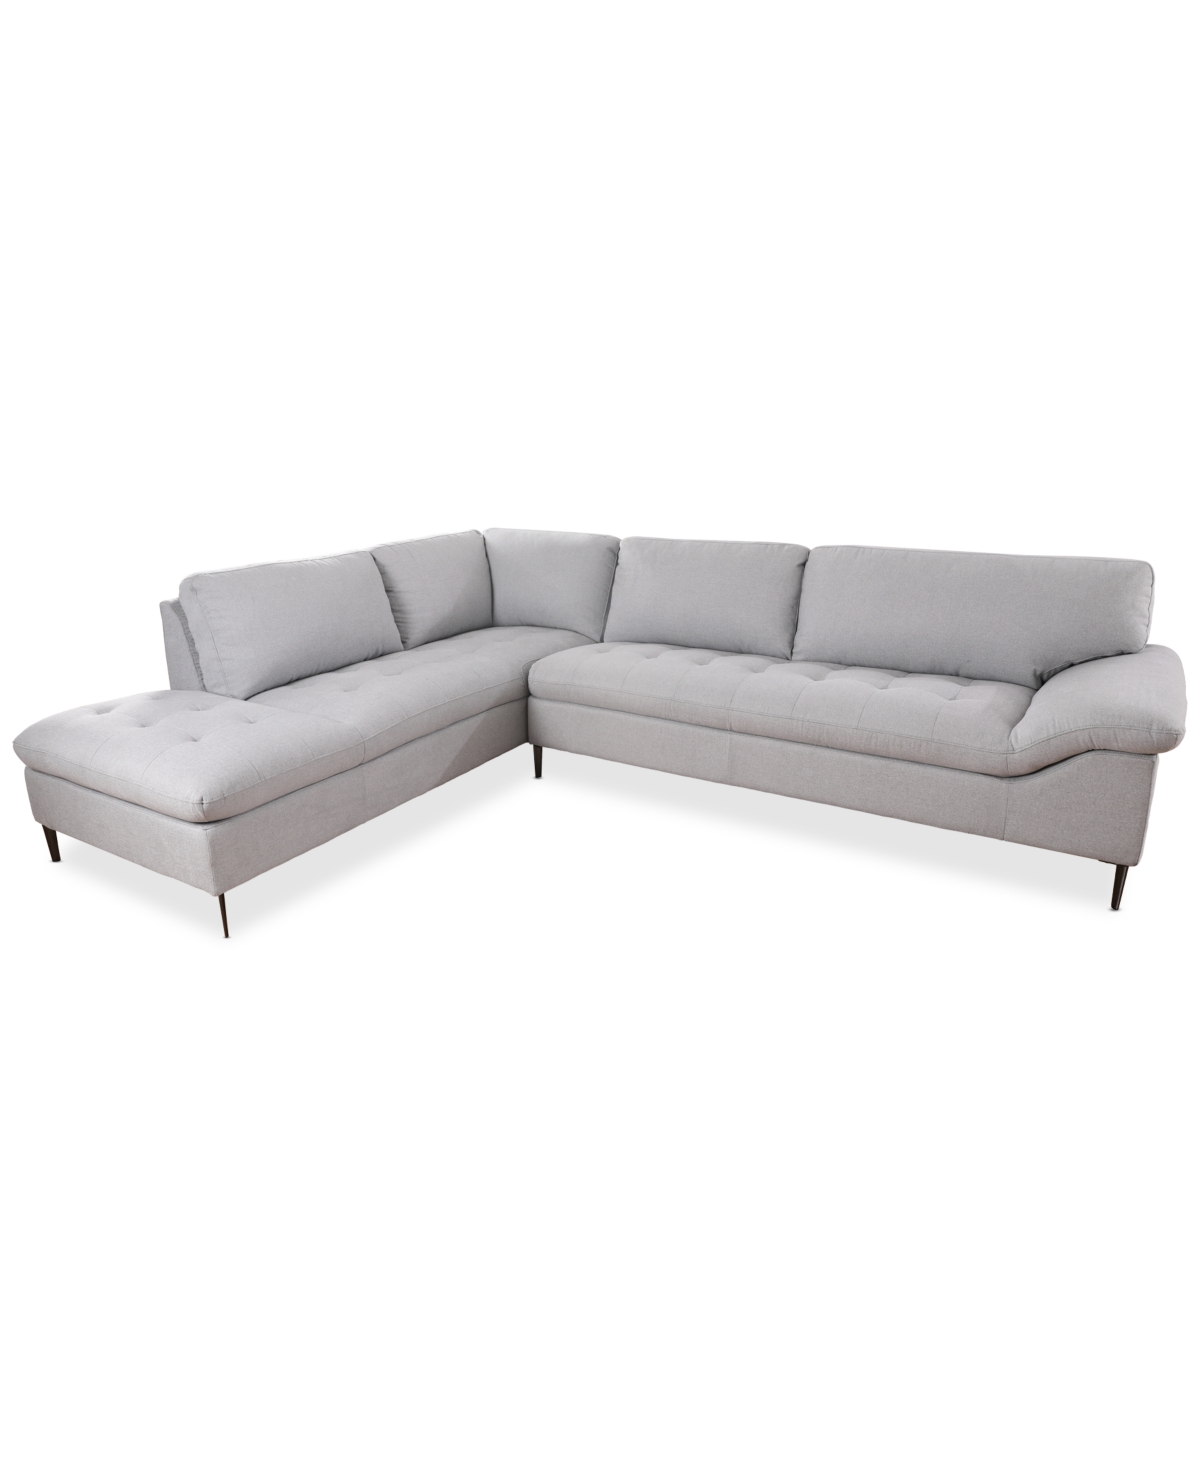 Furniture Closeout! Torbin 90" 2-pc. Fabric Sectional Sofa, Created For Macy's In Grey